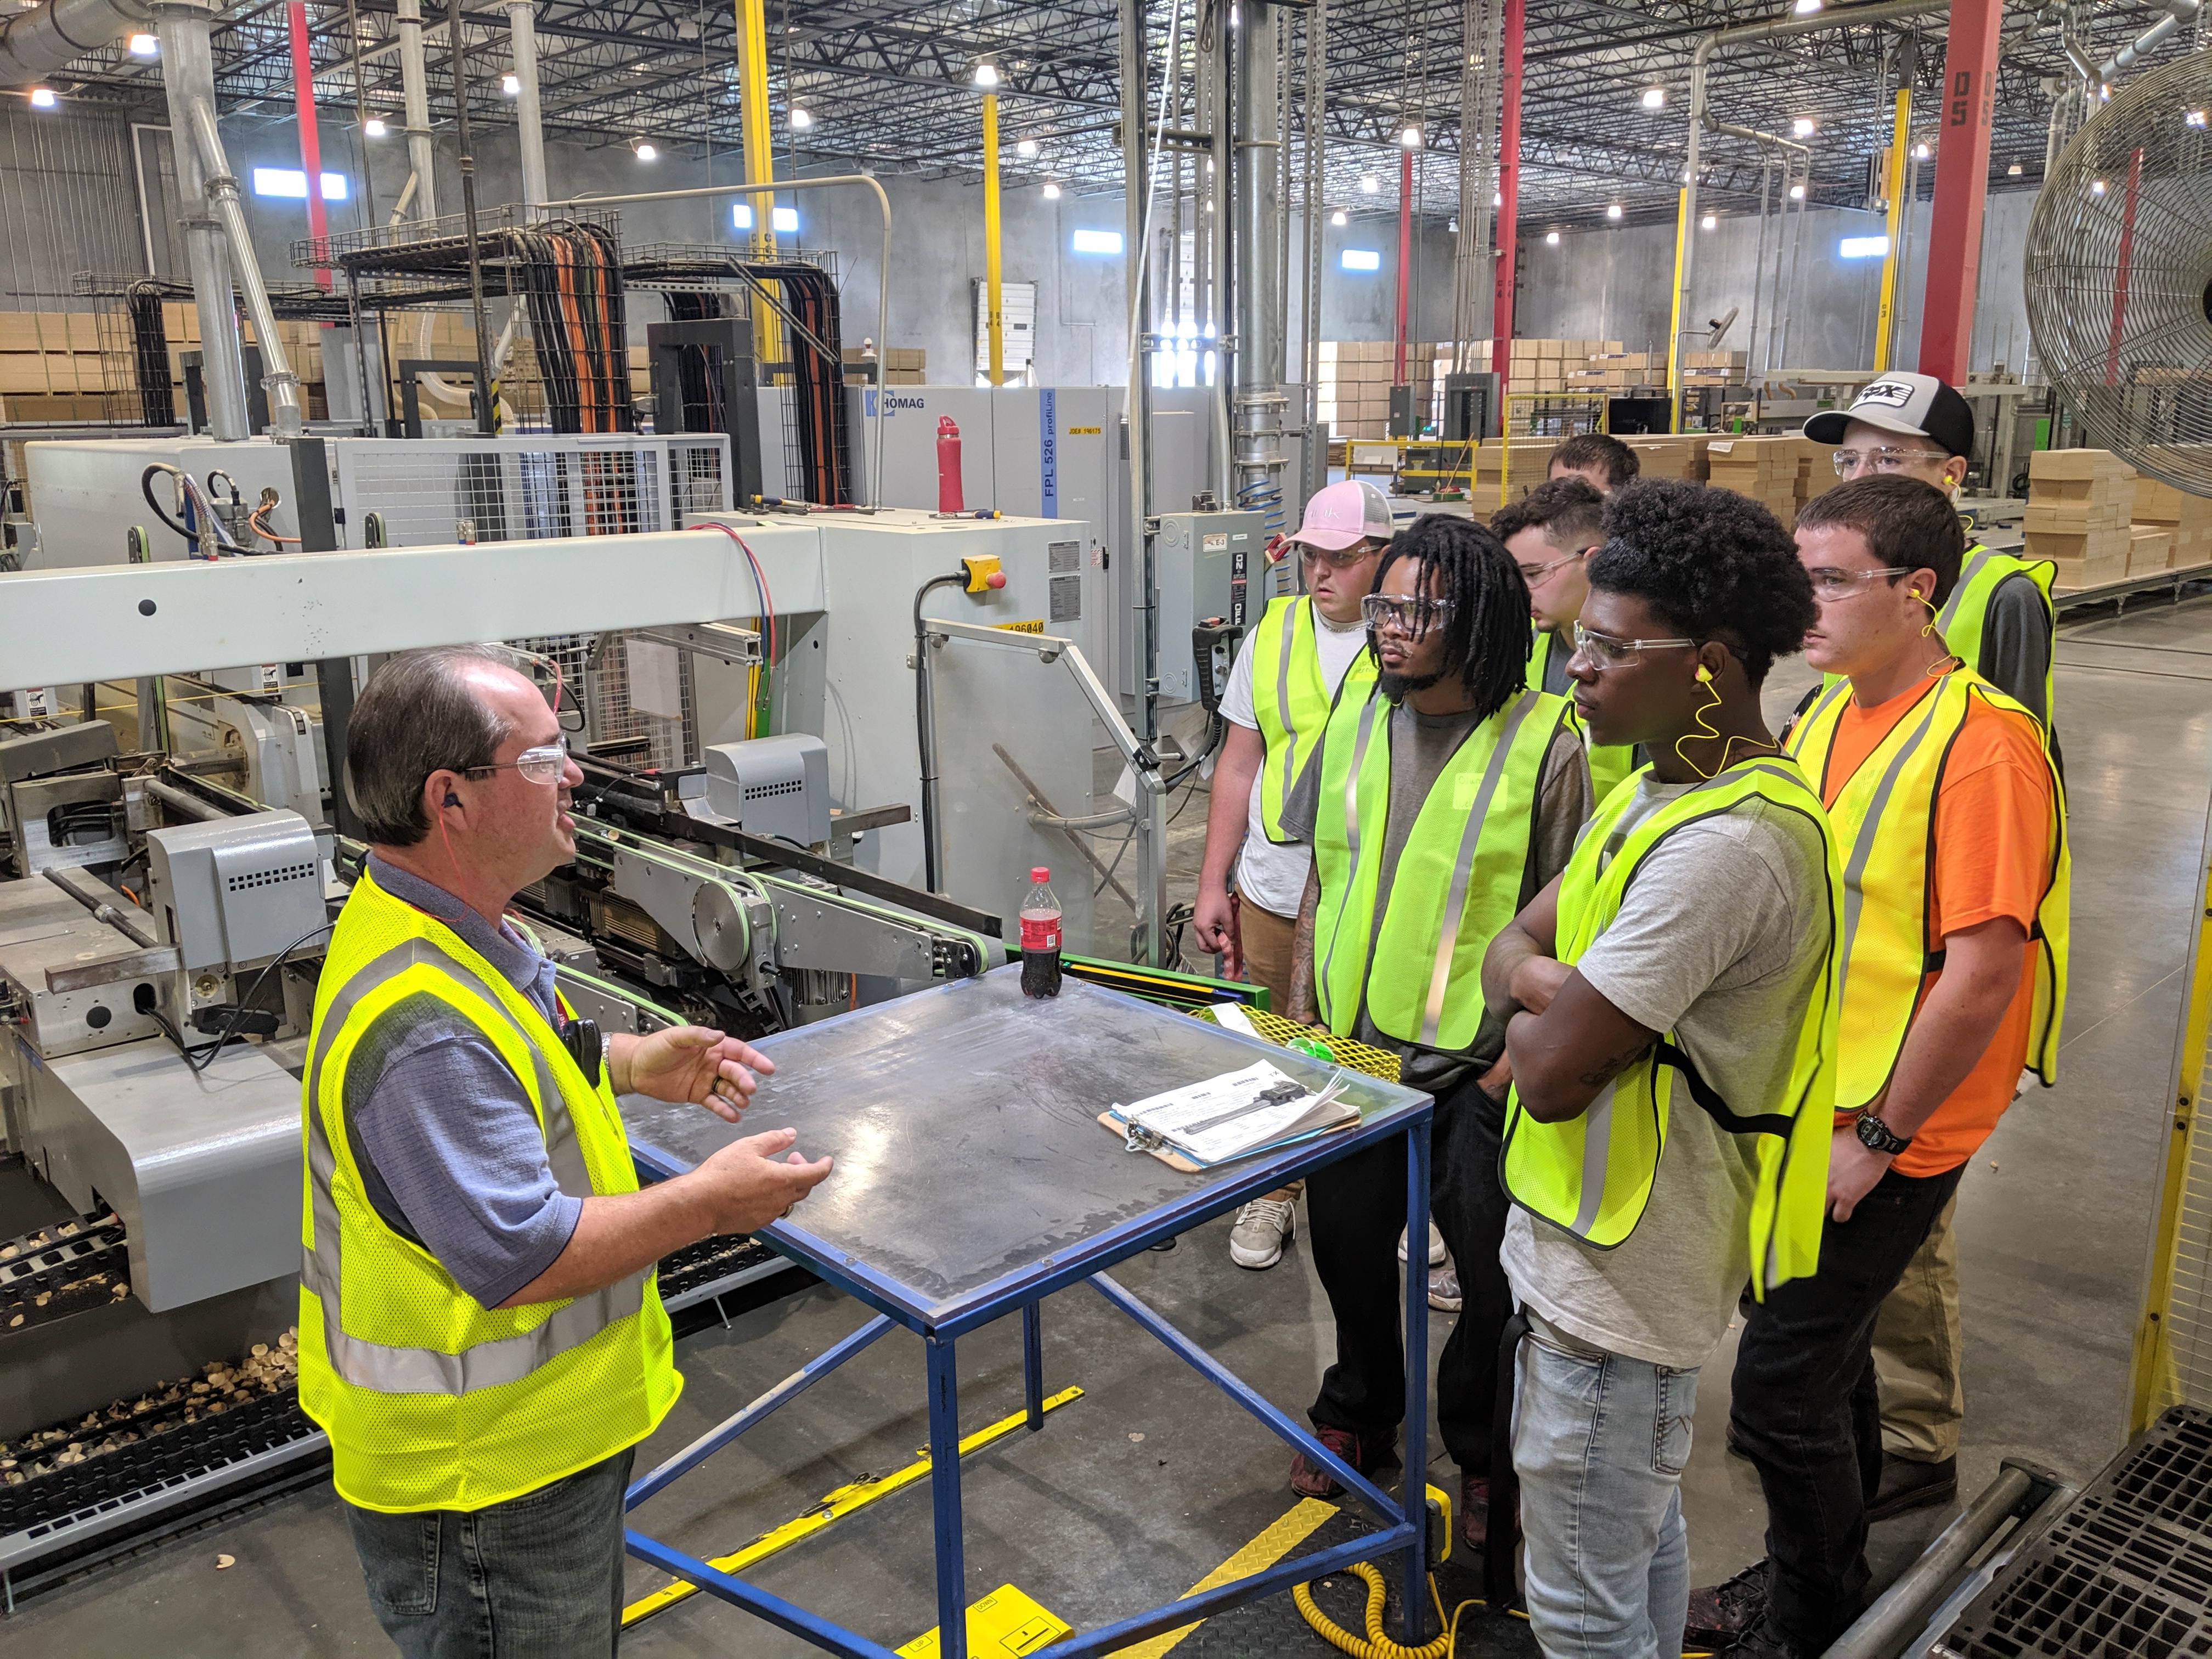 Students stand listening to a plant employee talk about the manufacturing process